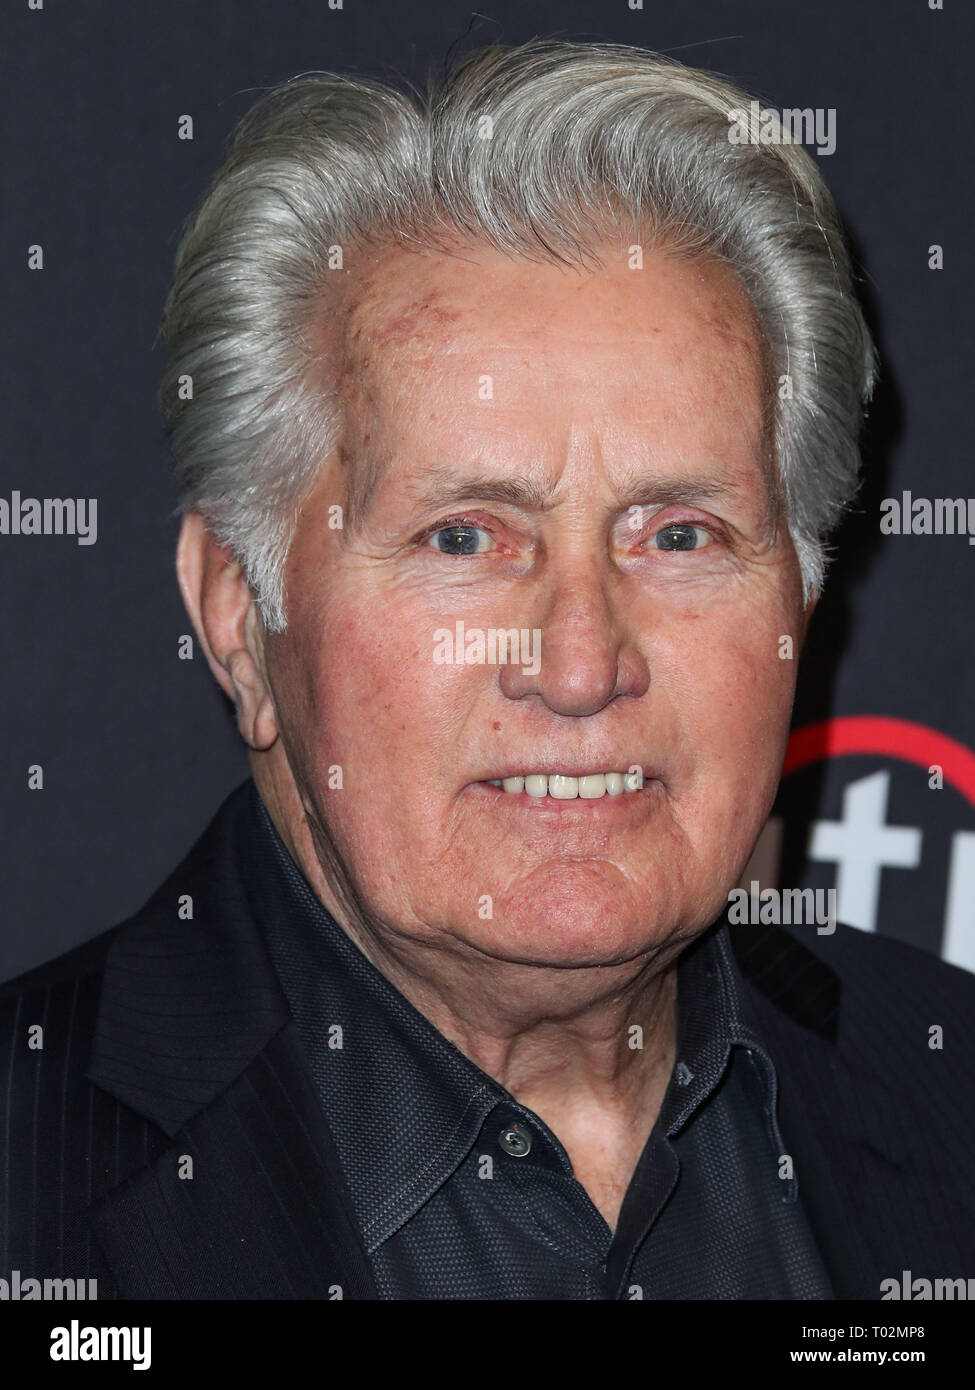 California, USA. 16th March 2019. Actor Martin Sheen arrives at the 2019 PaleyFest LA - Netflix’s 'Grace and Frankie' held at the Dolby Theatre on March 16, 2019 in Hollywood, Los Angeles, California, United States. (Photo by Xavier Collin/Image Press Agency) Credit: Image Press Agency/Alamy Live News Stock Photo